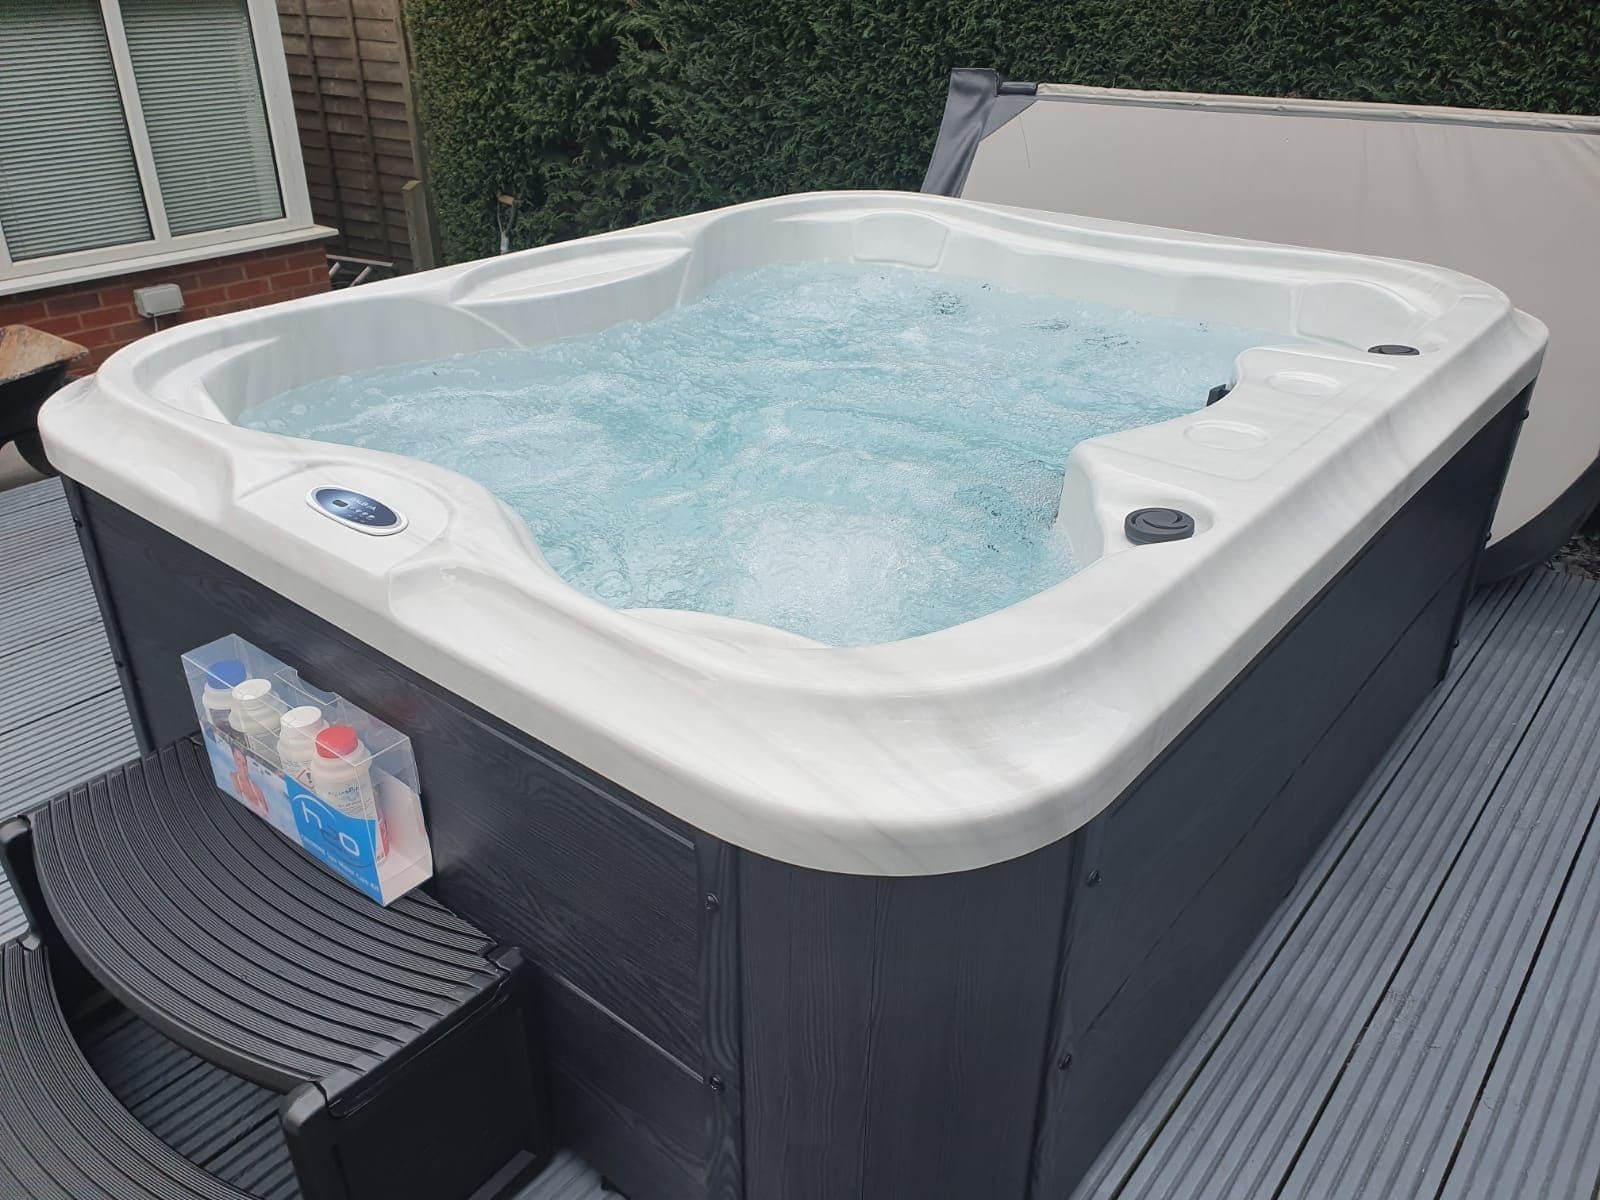 H20 2000 Series 13A Plug & Play 5 Person Hot Tub - Heracles Wellness